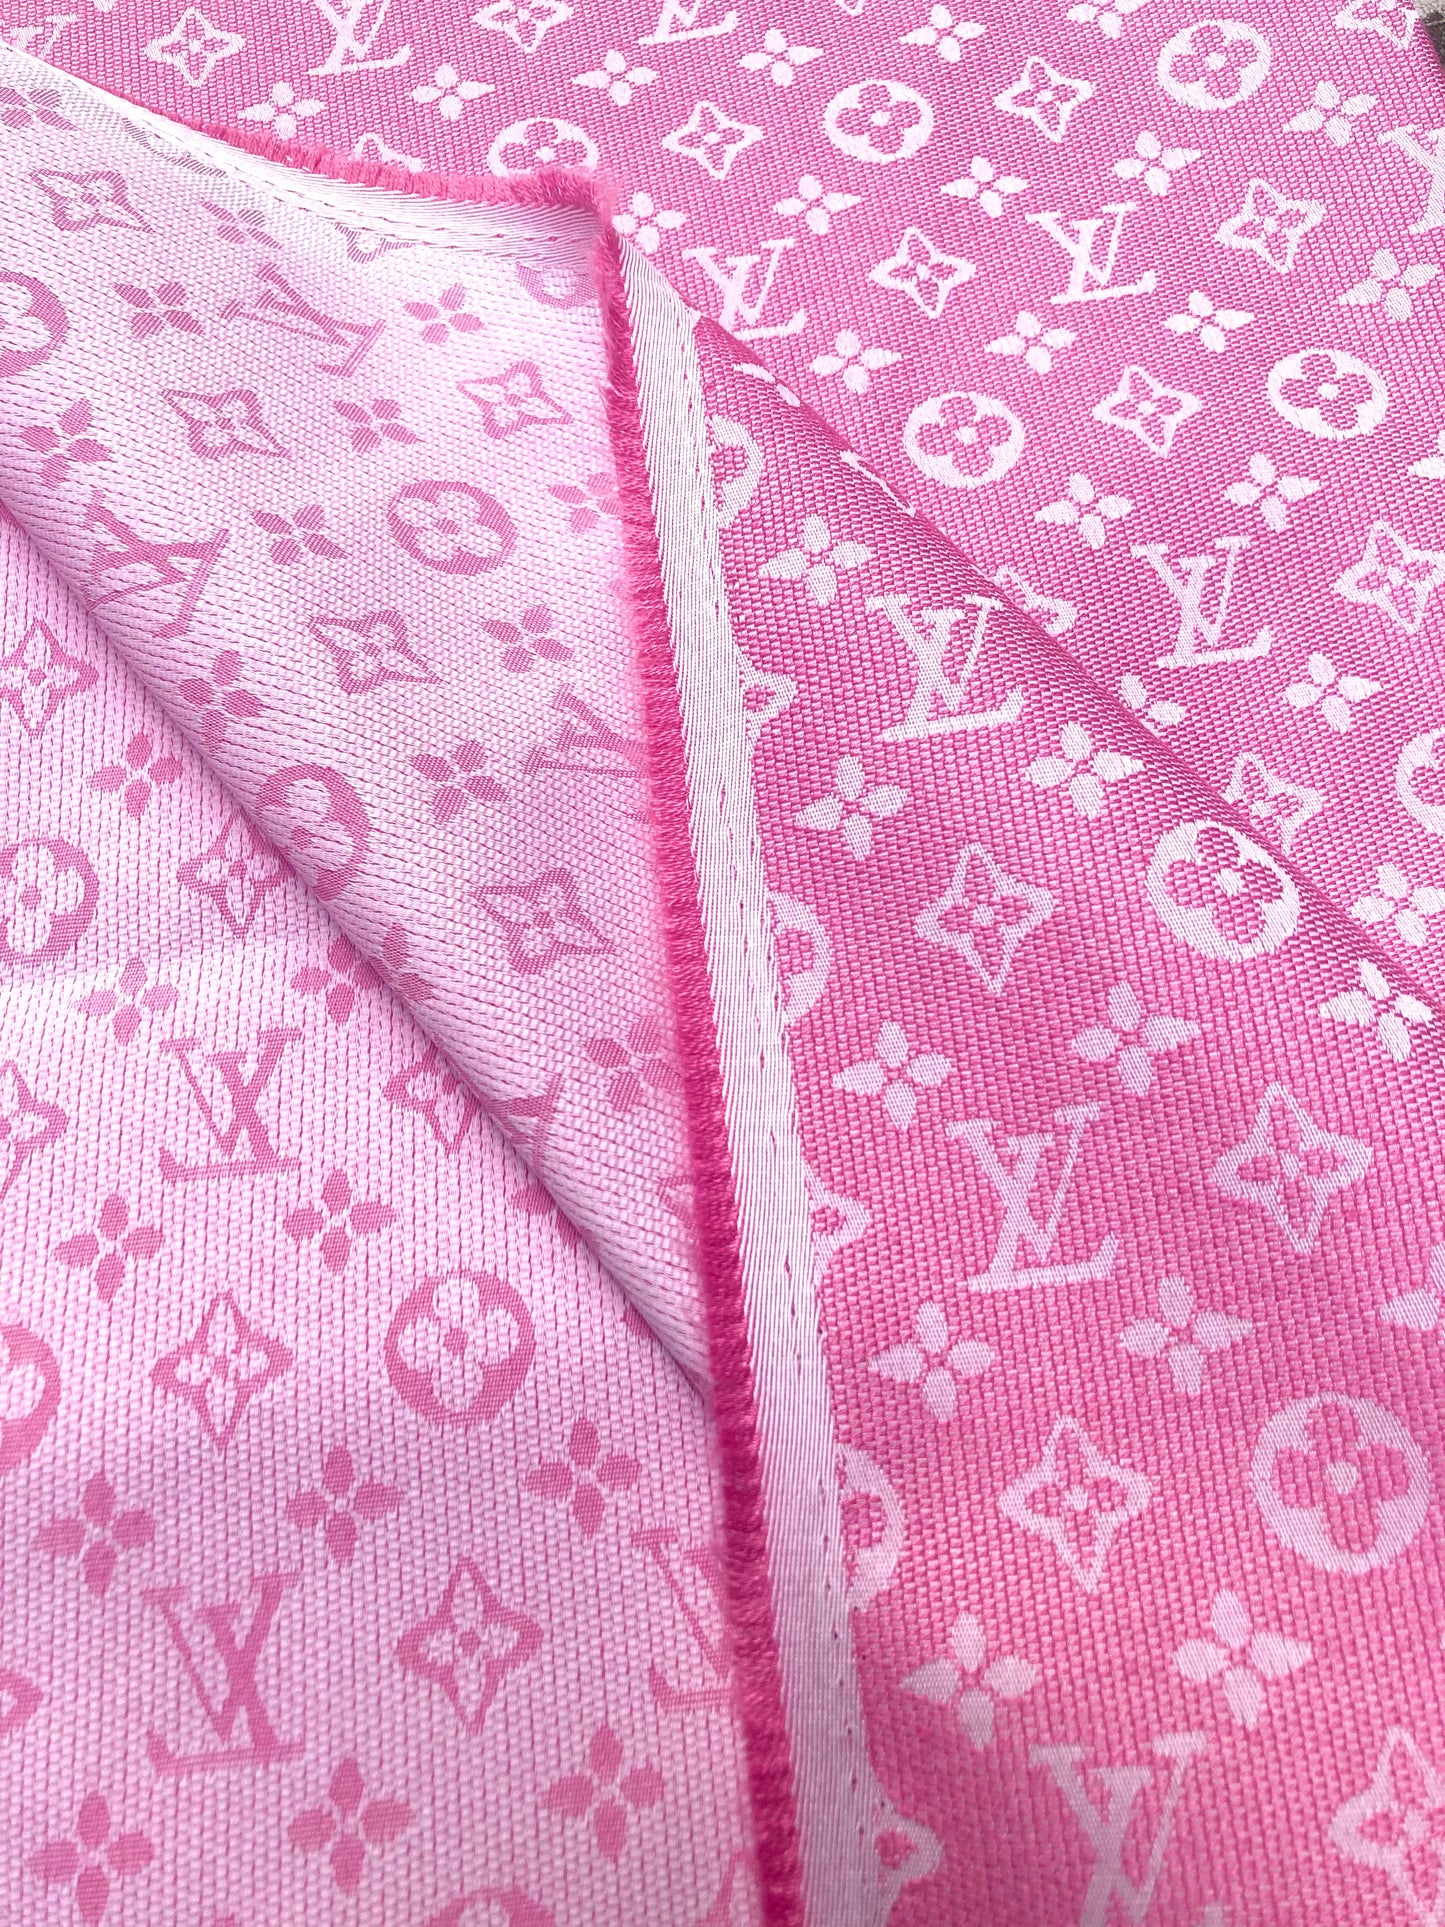 Barbie Pink LV Inspired Fabric for Handmade DIY Projects